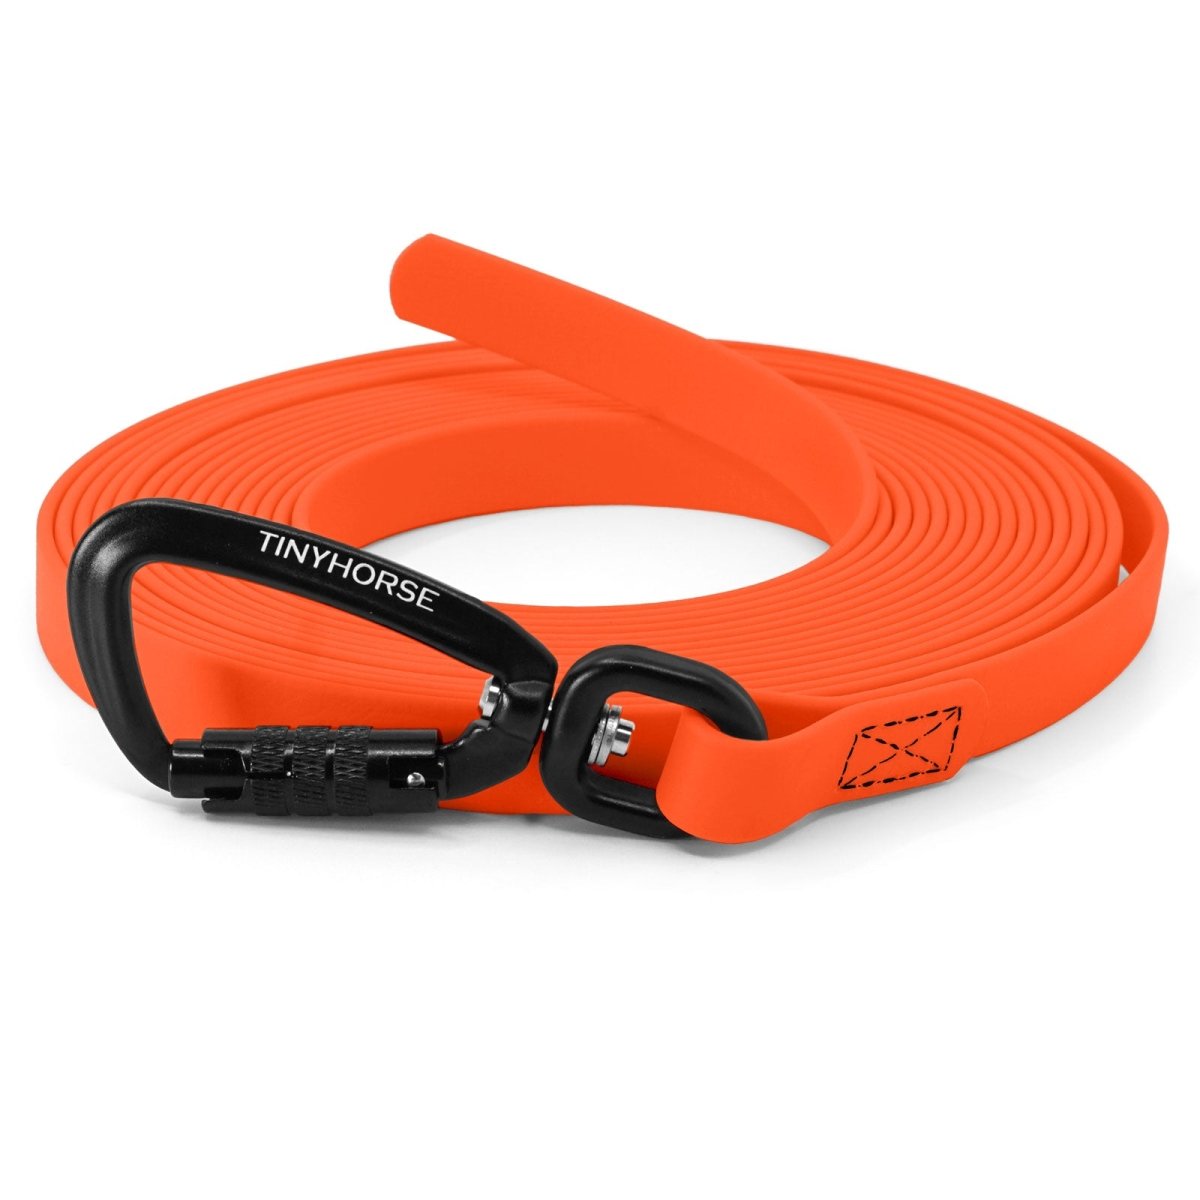 A neon orange, handle-less long line with an auto-locking carabiner